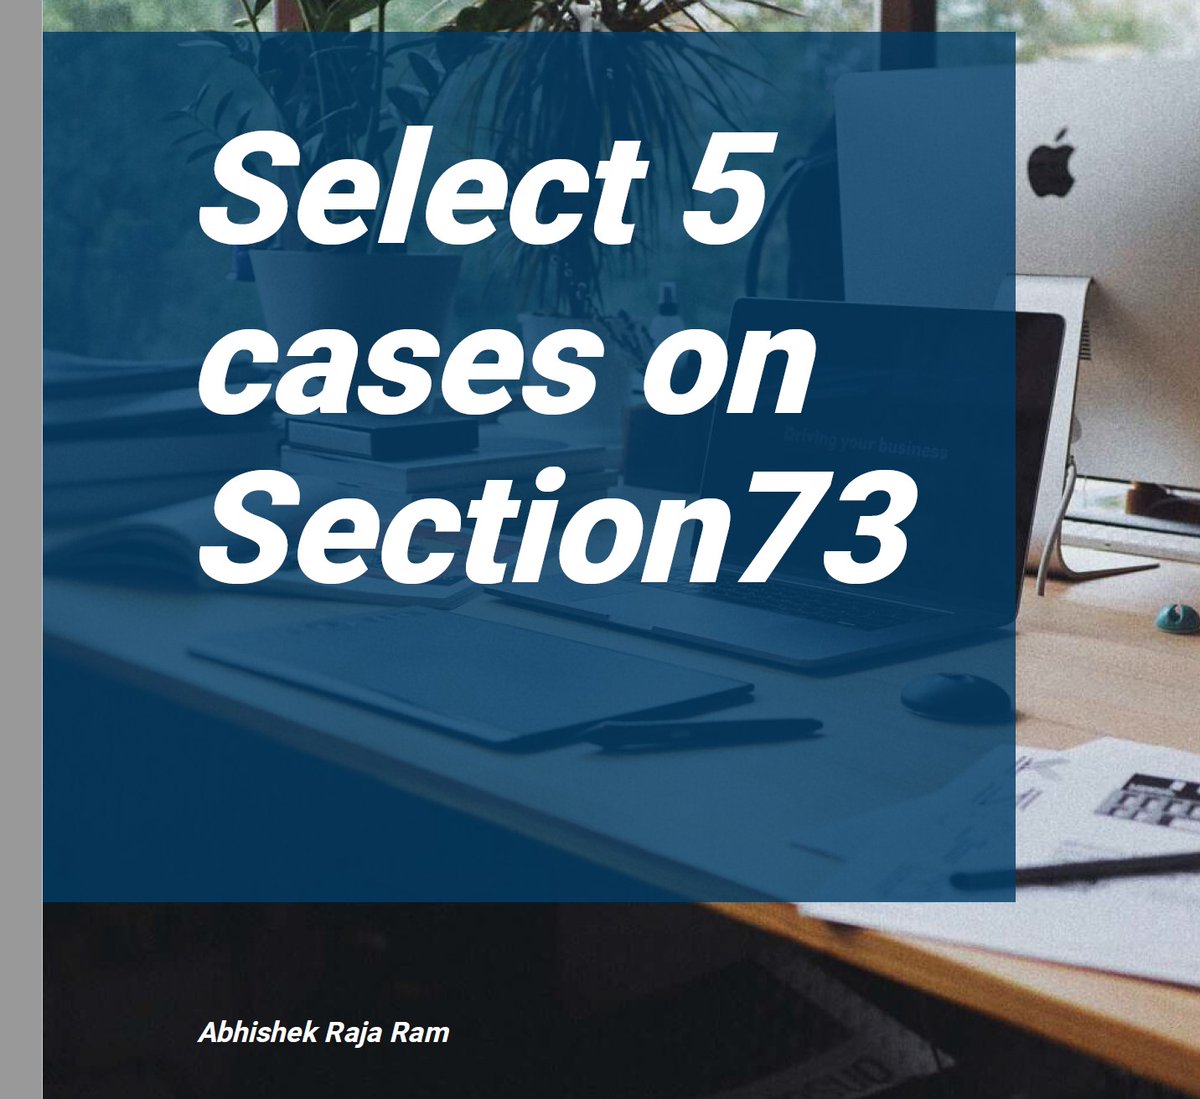 We are all aware of Section 73 GST Laws. We have compiled a summary of Section 73 and five selected cases. Like and Retweet this Tweet to receive a Link in DM of this 'FREE' e-book. Don't forget to follow me for regular 'FREE' e-books.